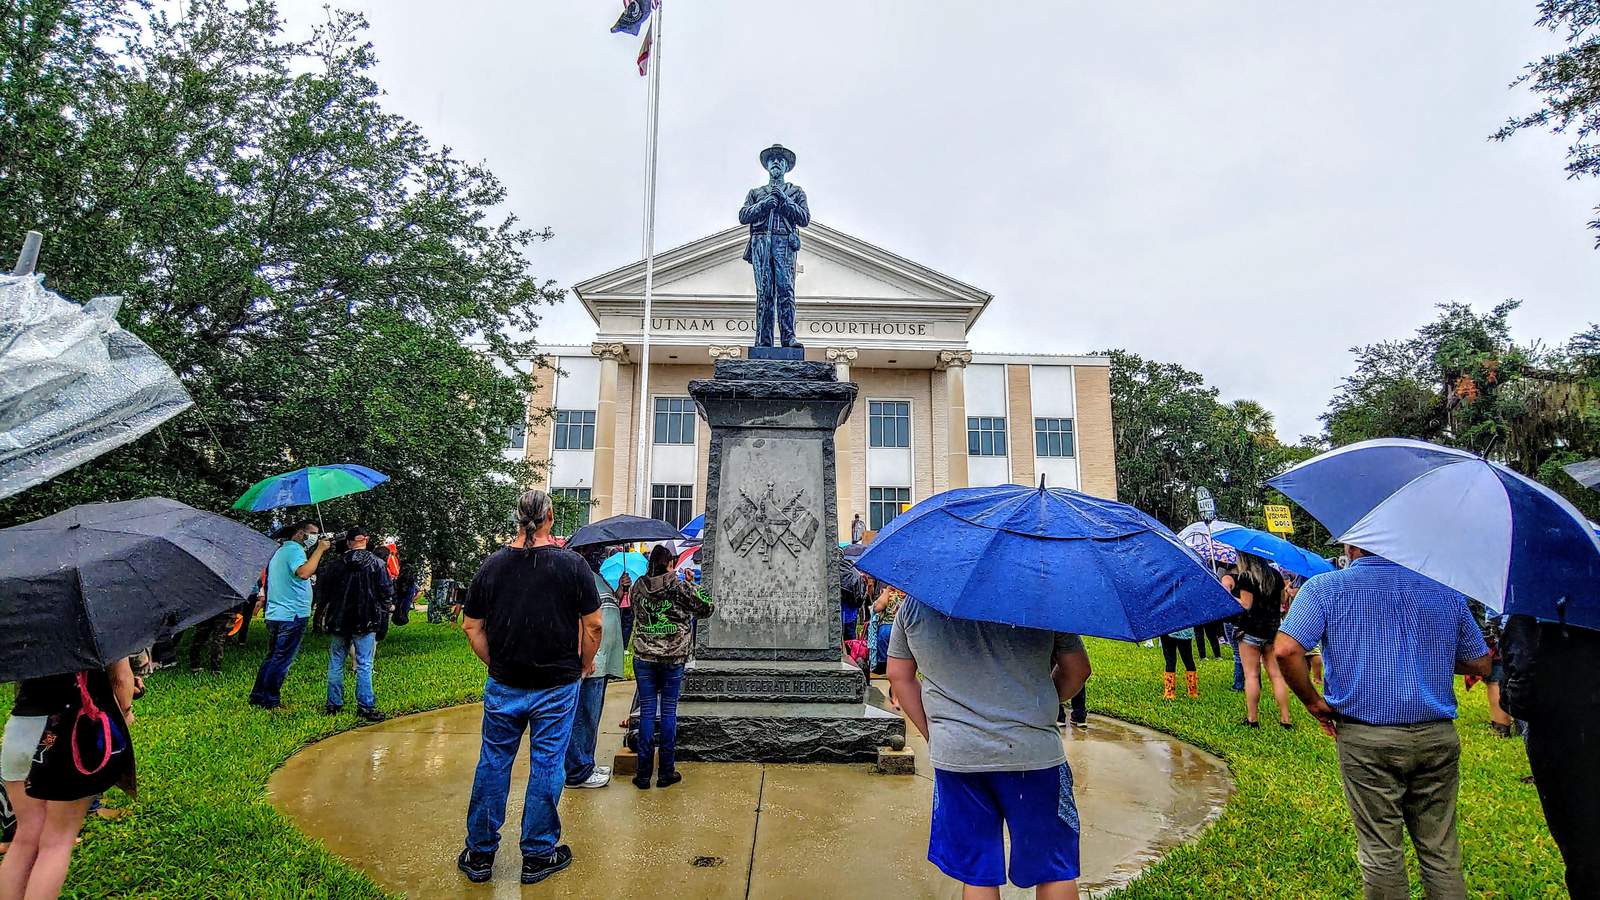 Putnam County commissioners decide to relocate Confederate statue in front of courthouse